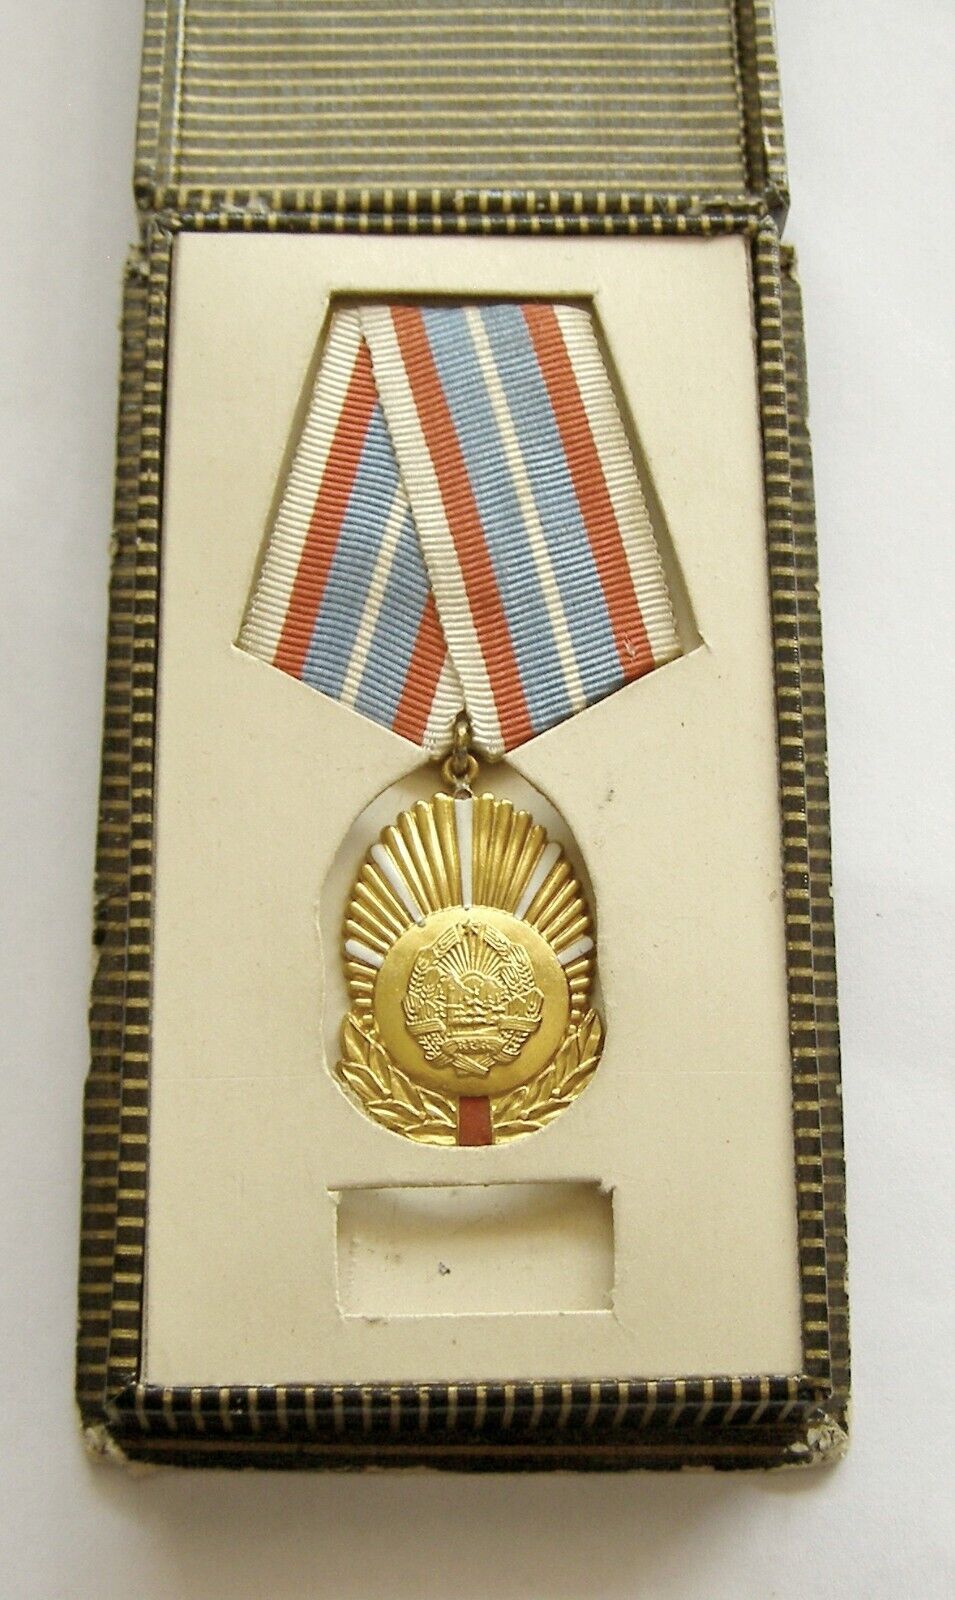 t777 ROMANIA In Service of the Socialist Homeland RPR 1 class medal in box